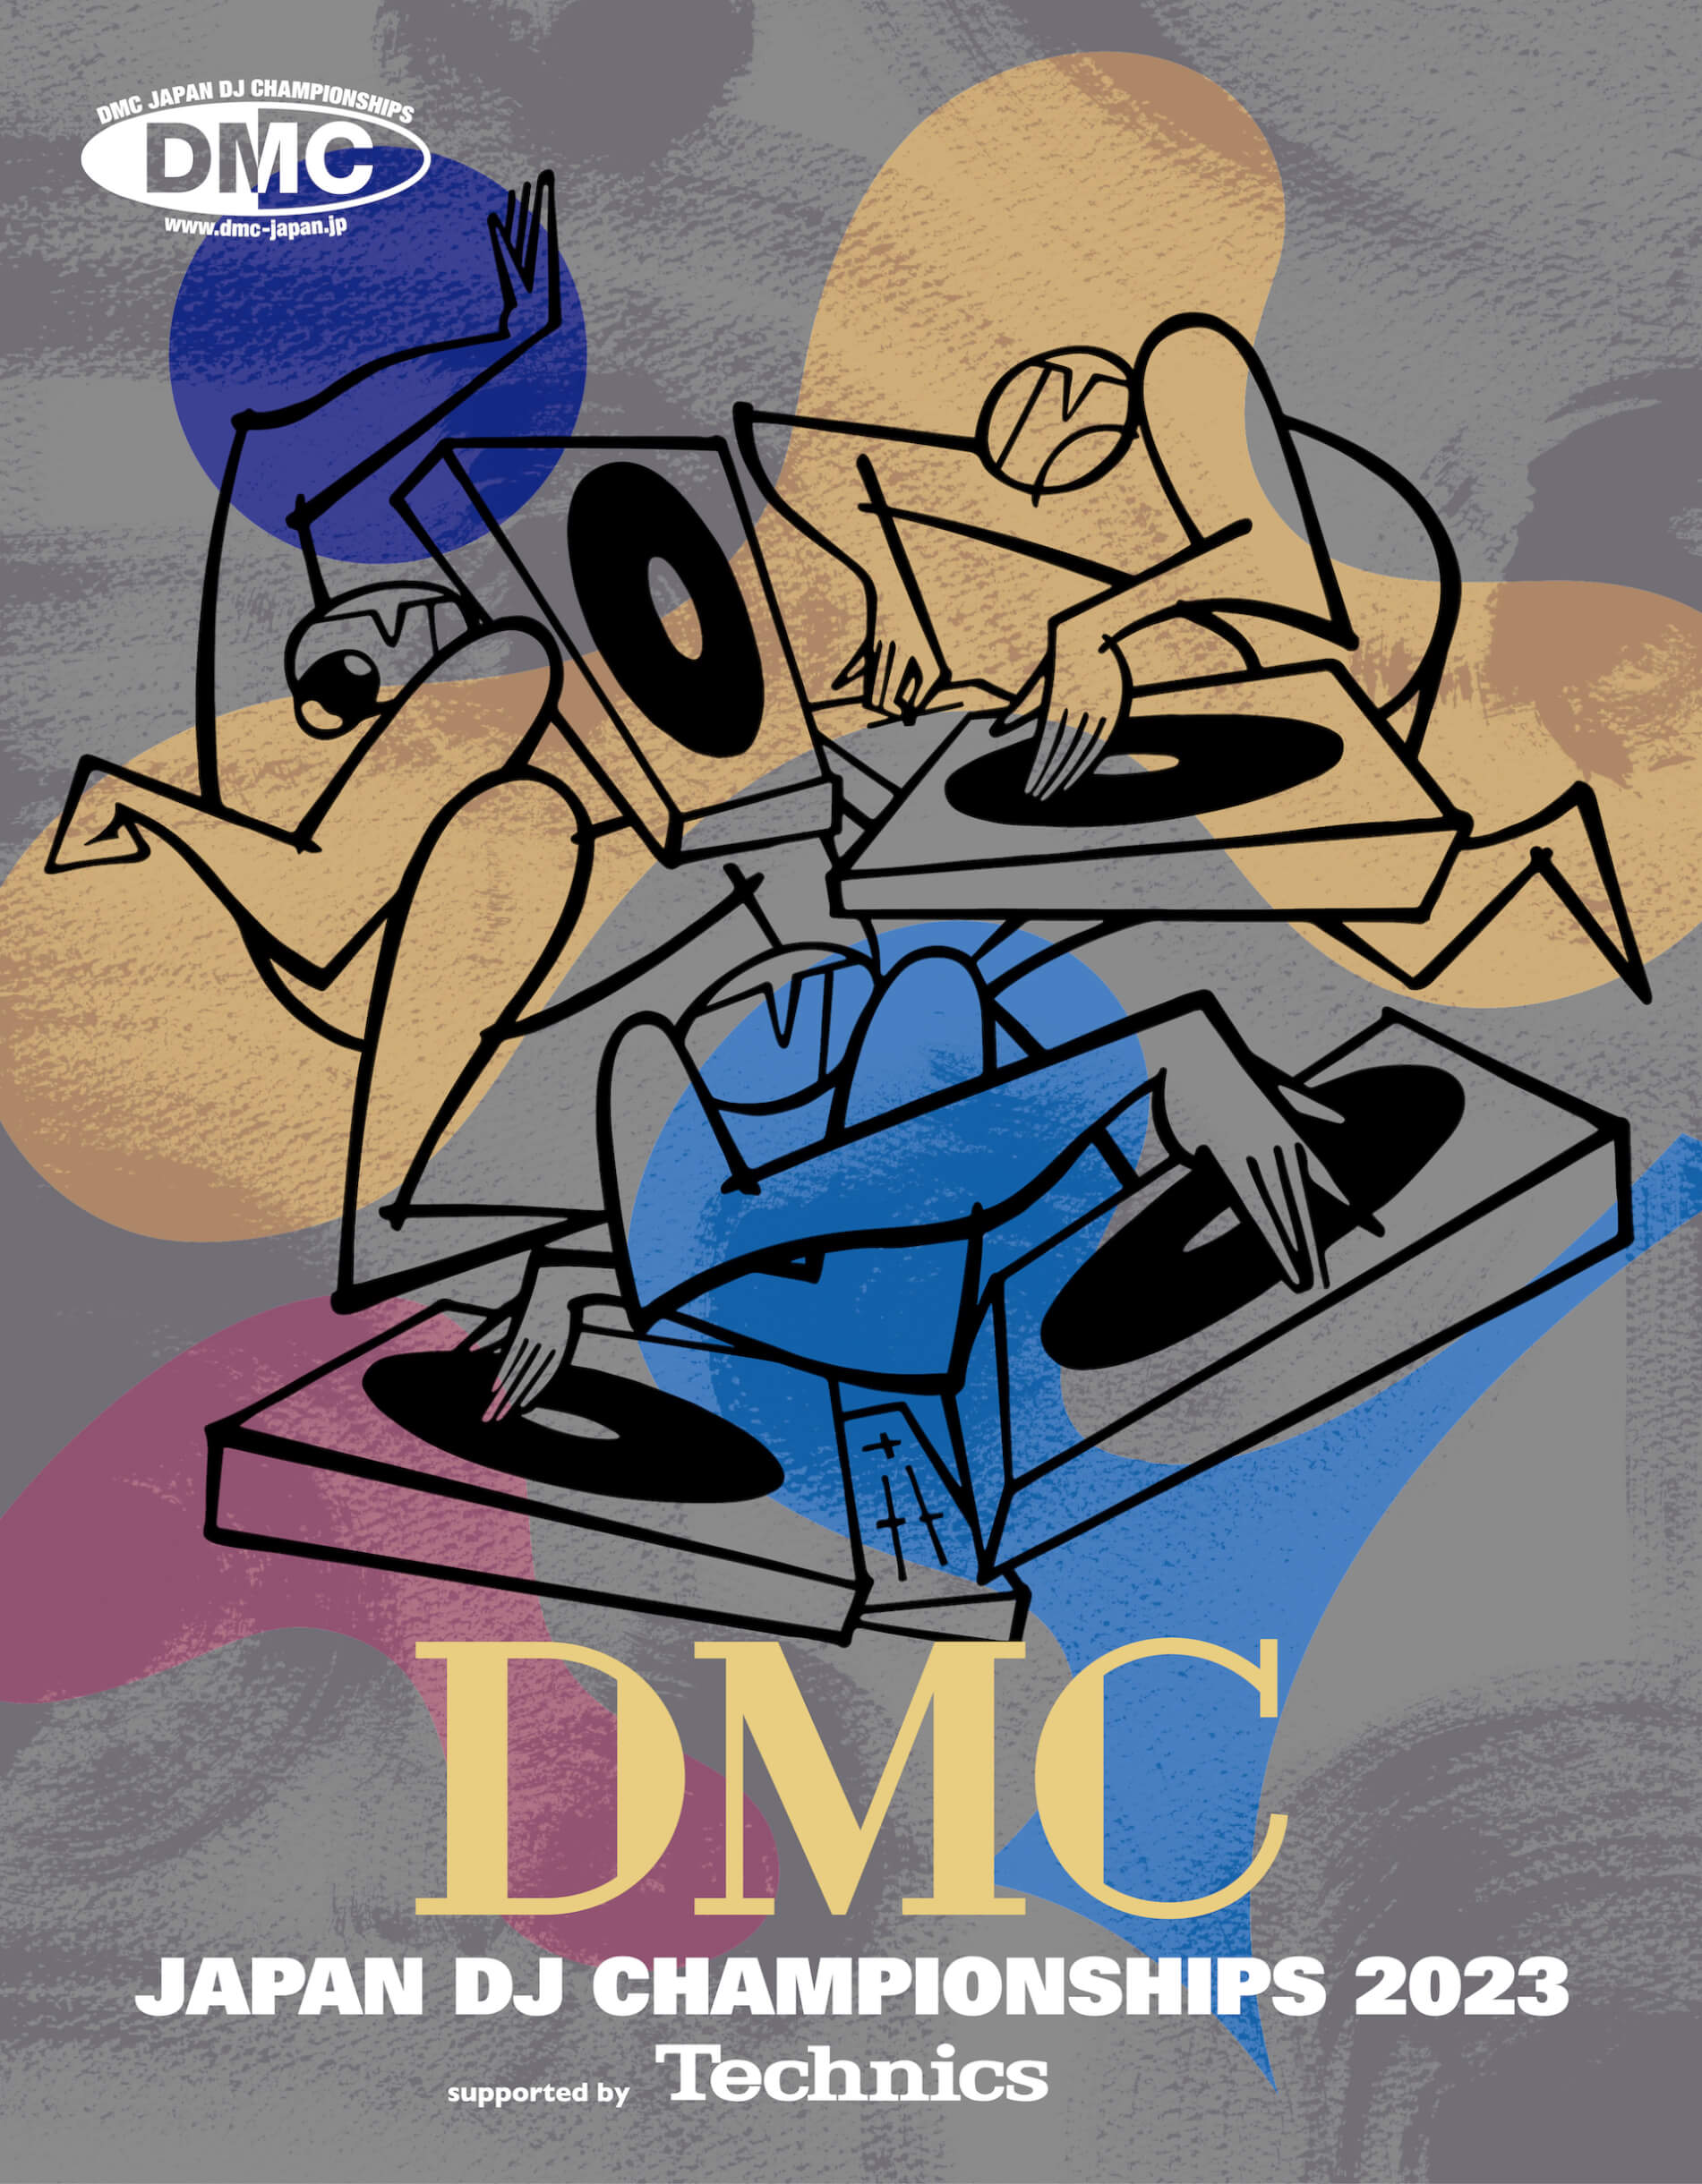 DMC JAPAN DJ CHAMPIONSHIPS 2023 supported by Technics